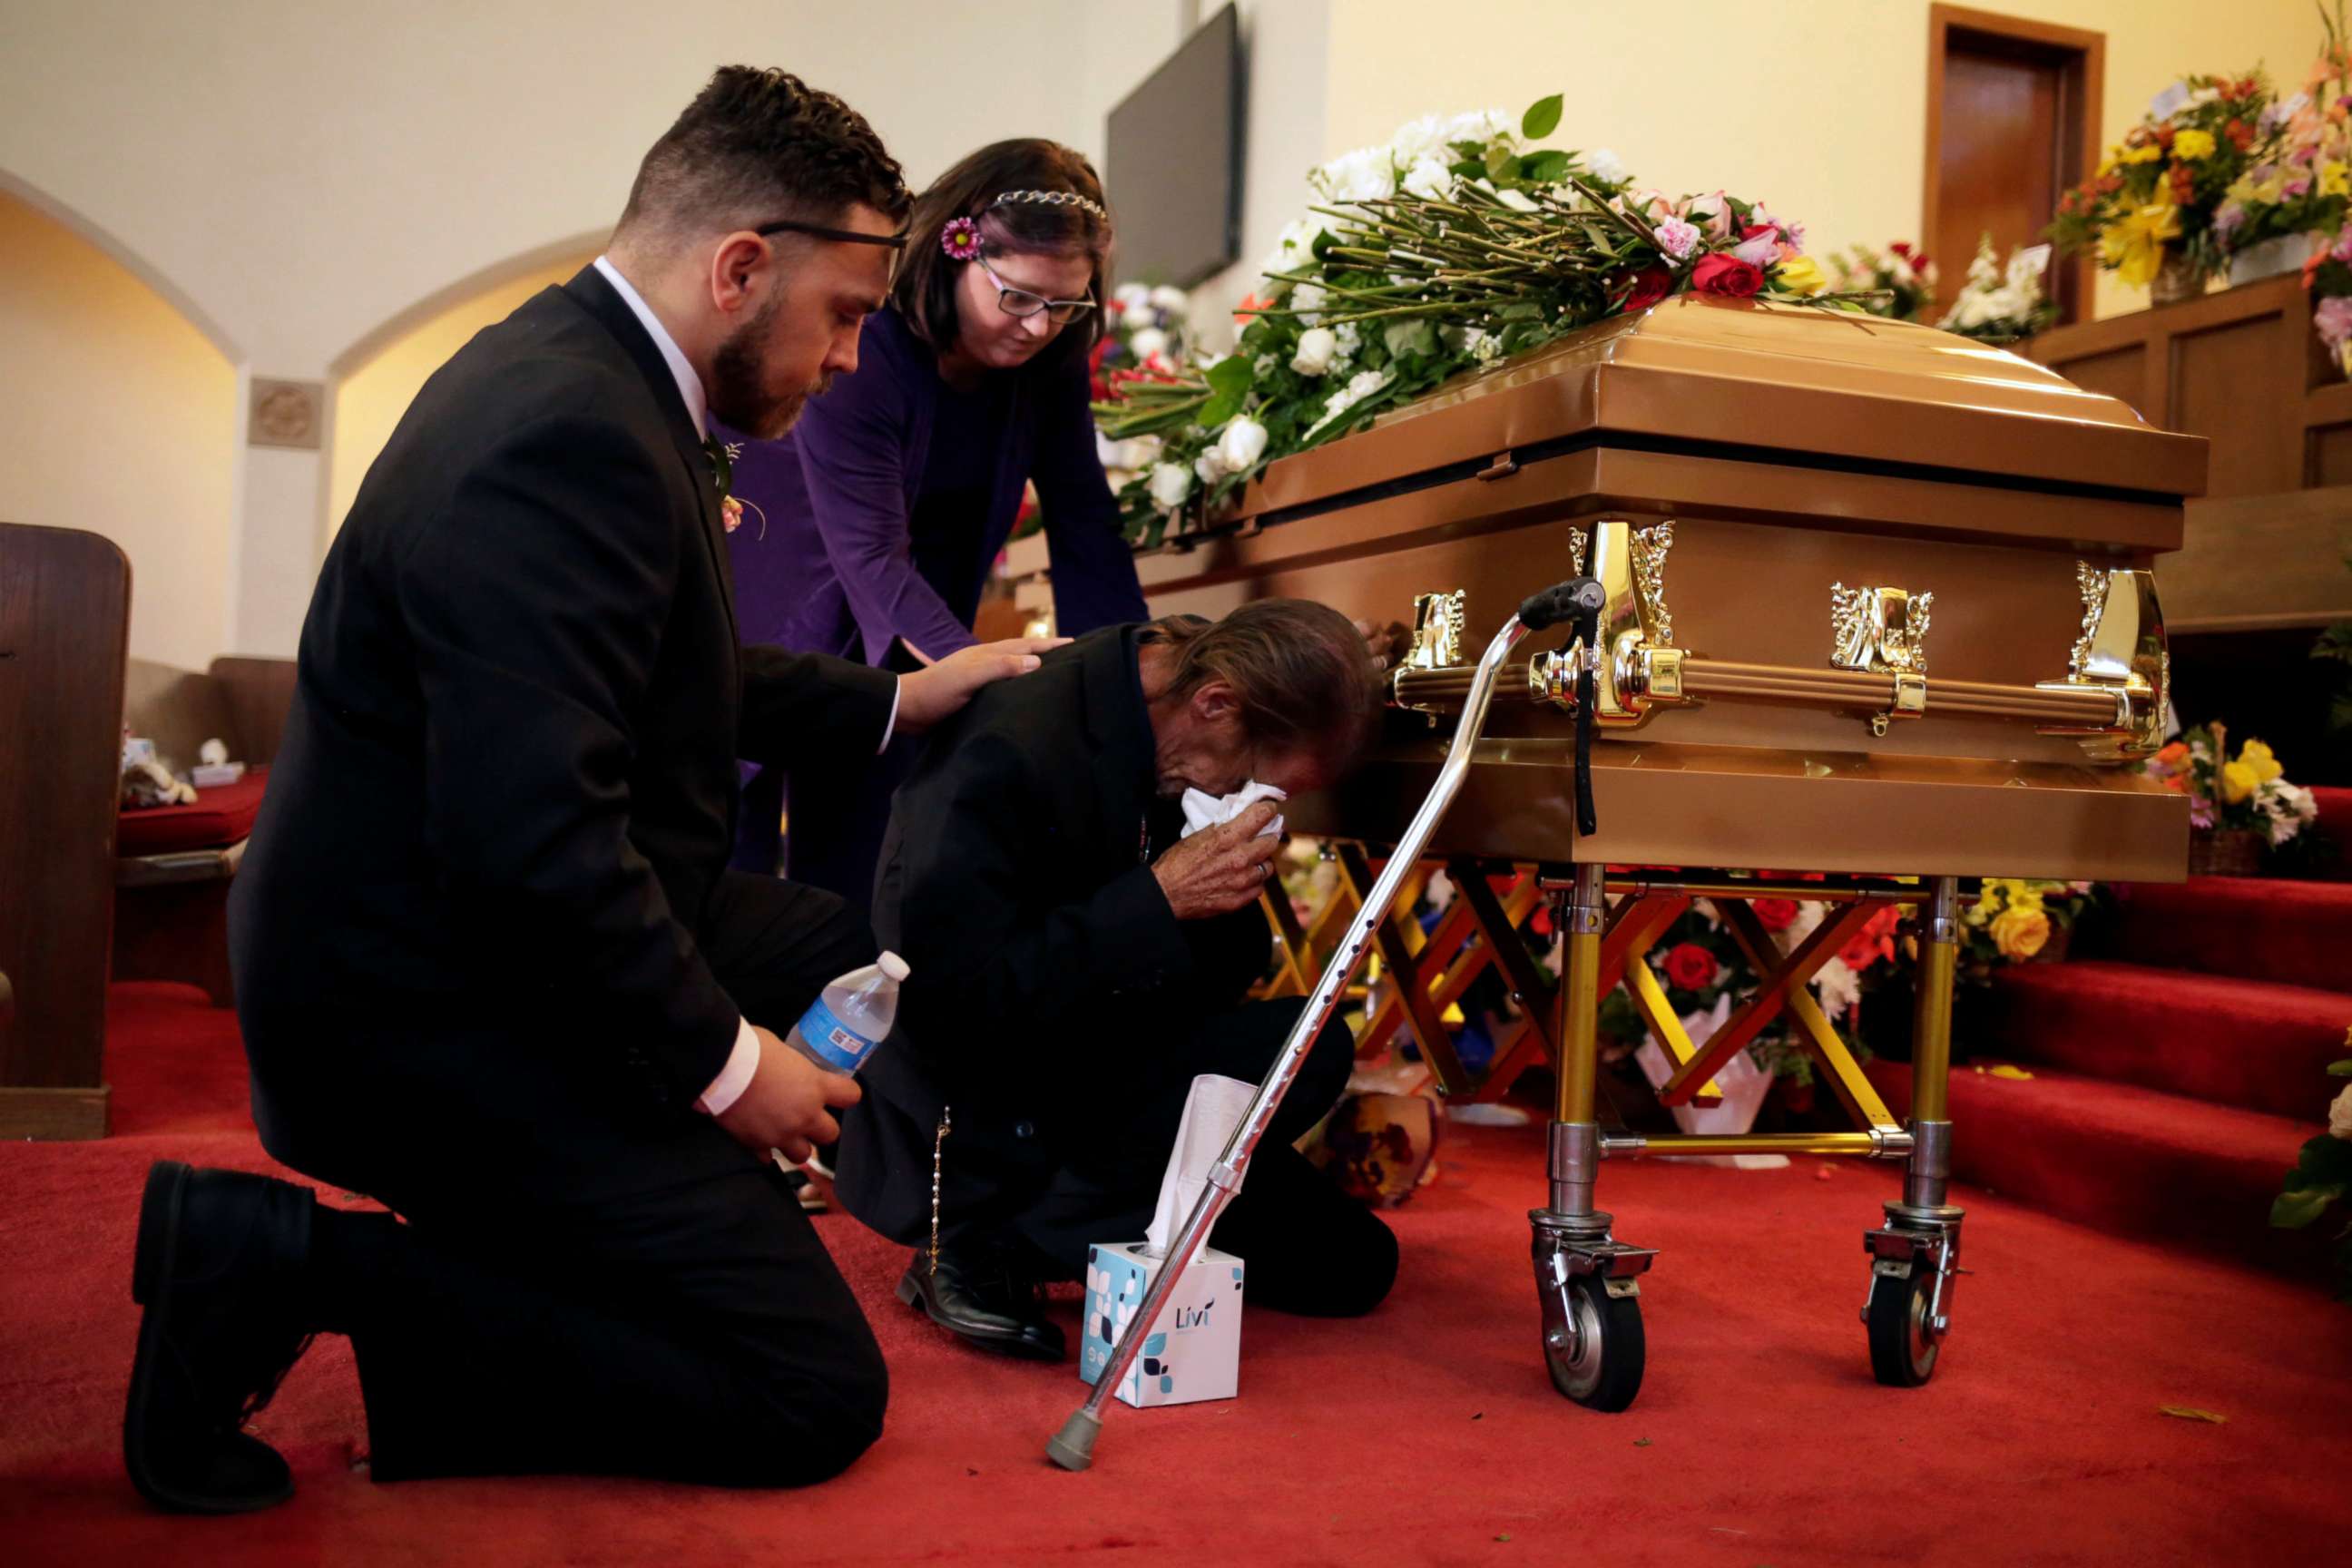 PHOTO: Antonio Basco is comforted during the wake of his wife Margie Reckard, murdered during a shooting at a Walmart store, in El Paso, Texas, U.S. August 17, 2019.